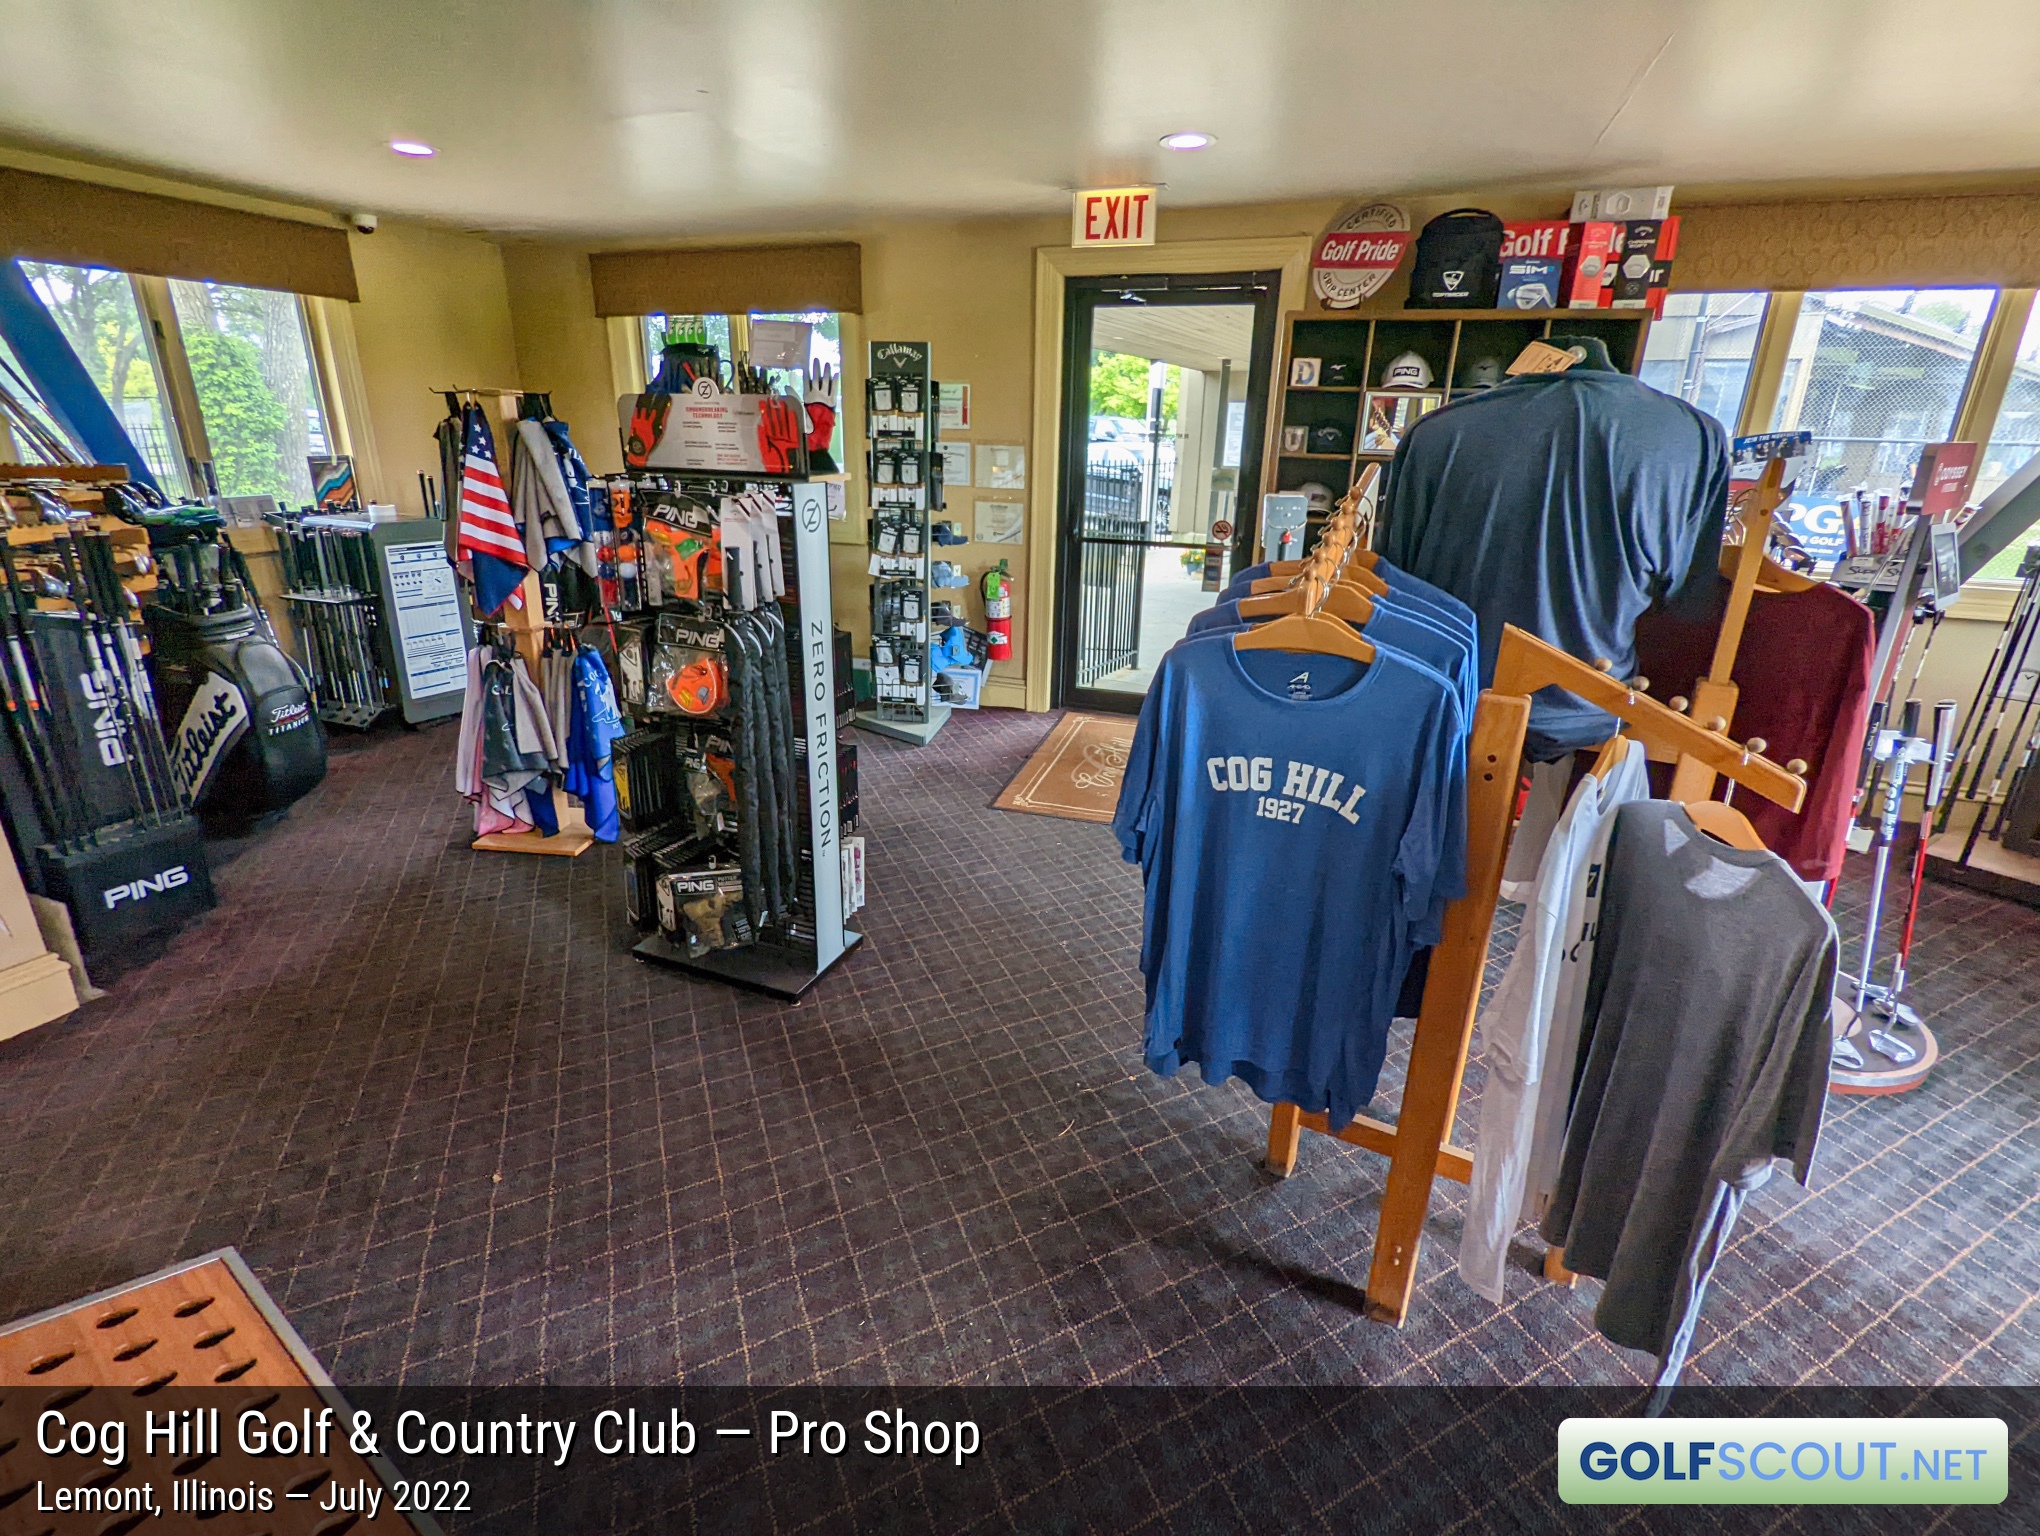 Photo of the pro shop at Cog Hill Course #3 in Lemont, Illinois. The golf shop at the driving range is the smallest of the three golf shops.